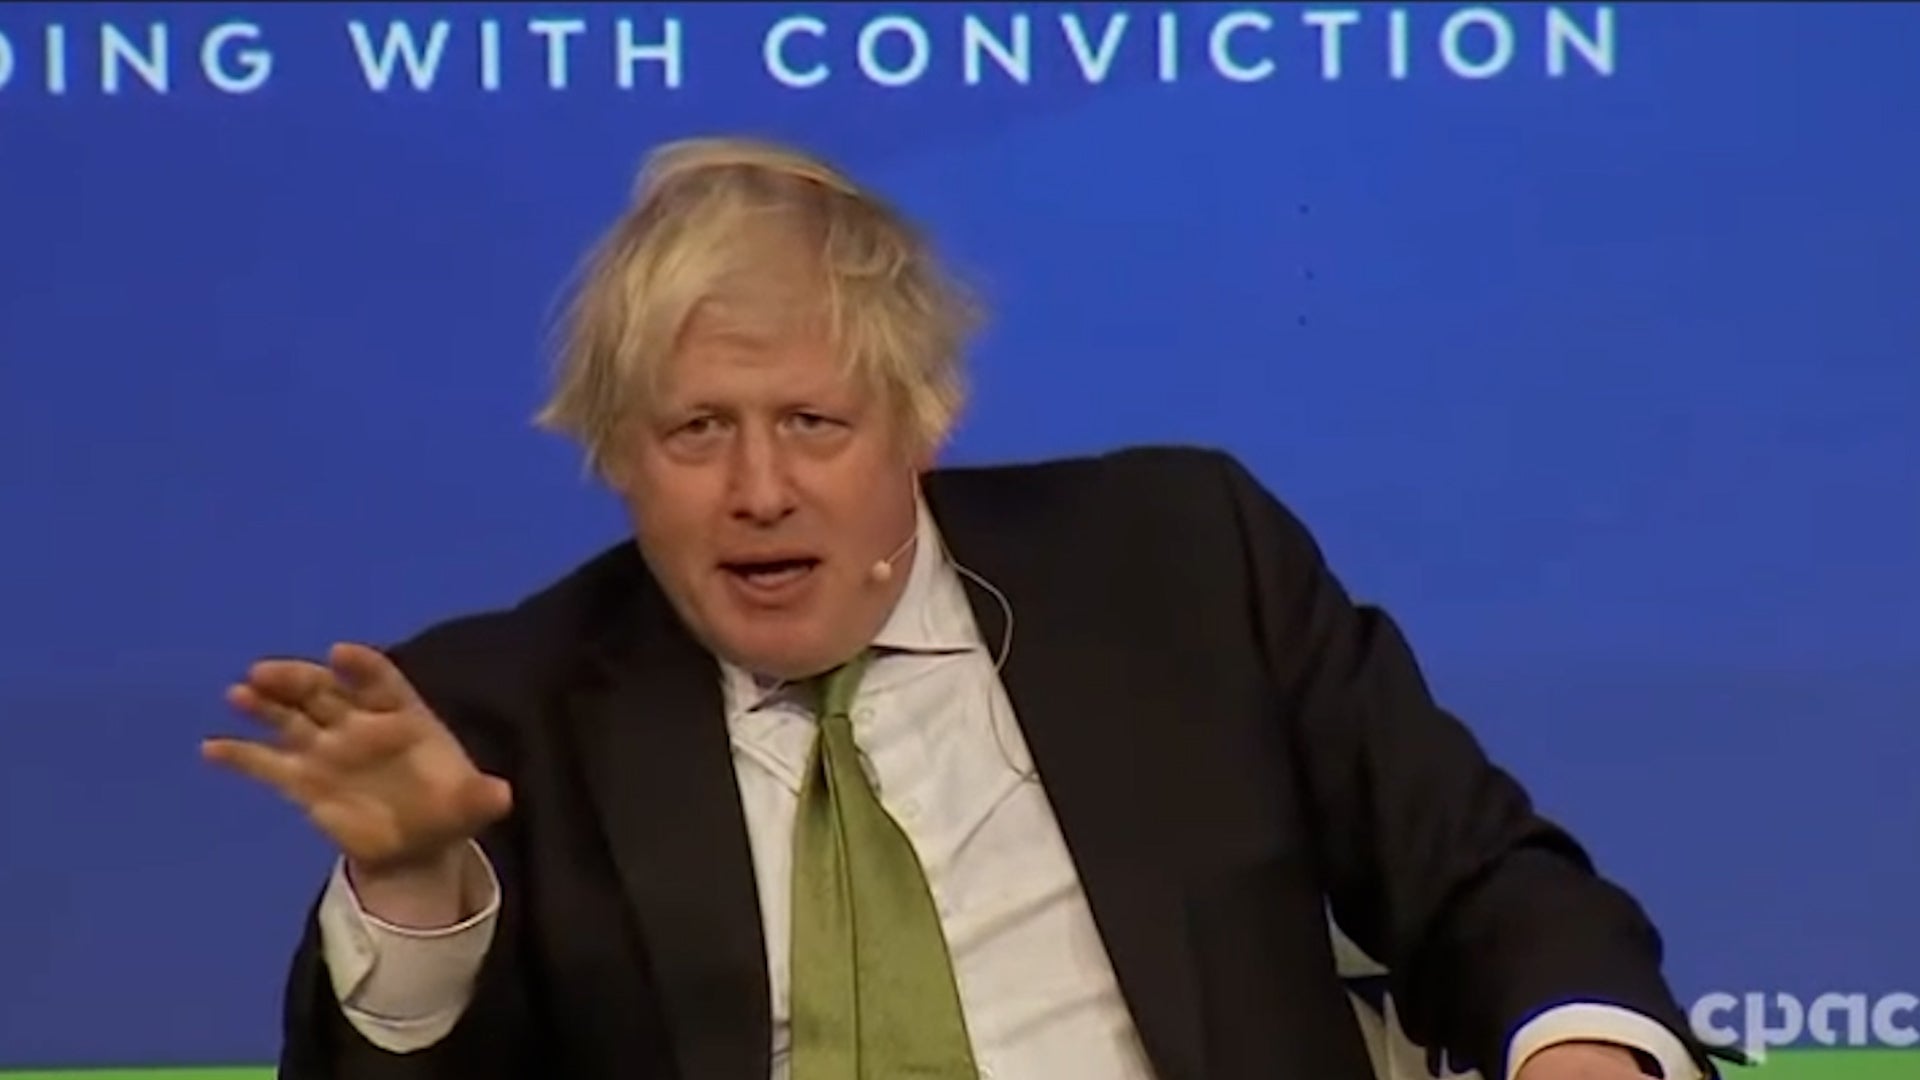 Boris Johnson said he wished he was black on the night Obama was elected, a journalist claimed